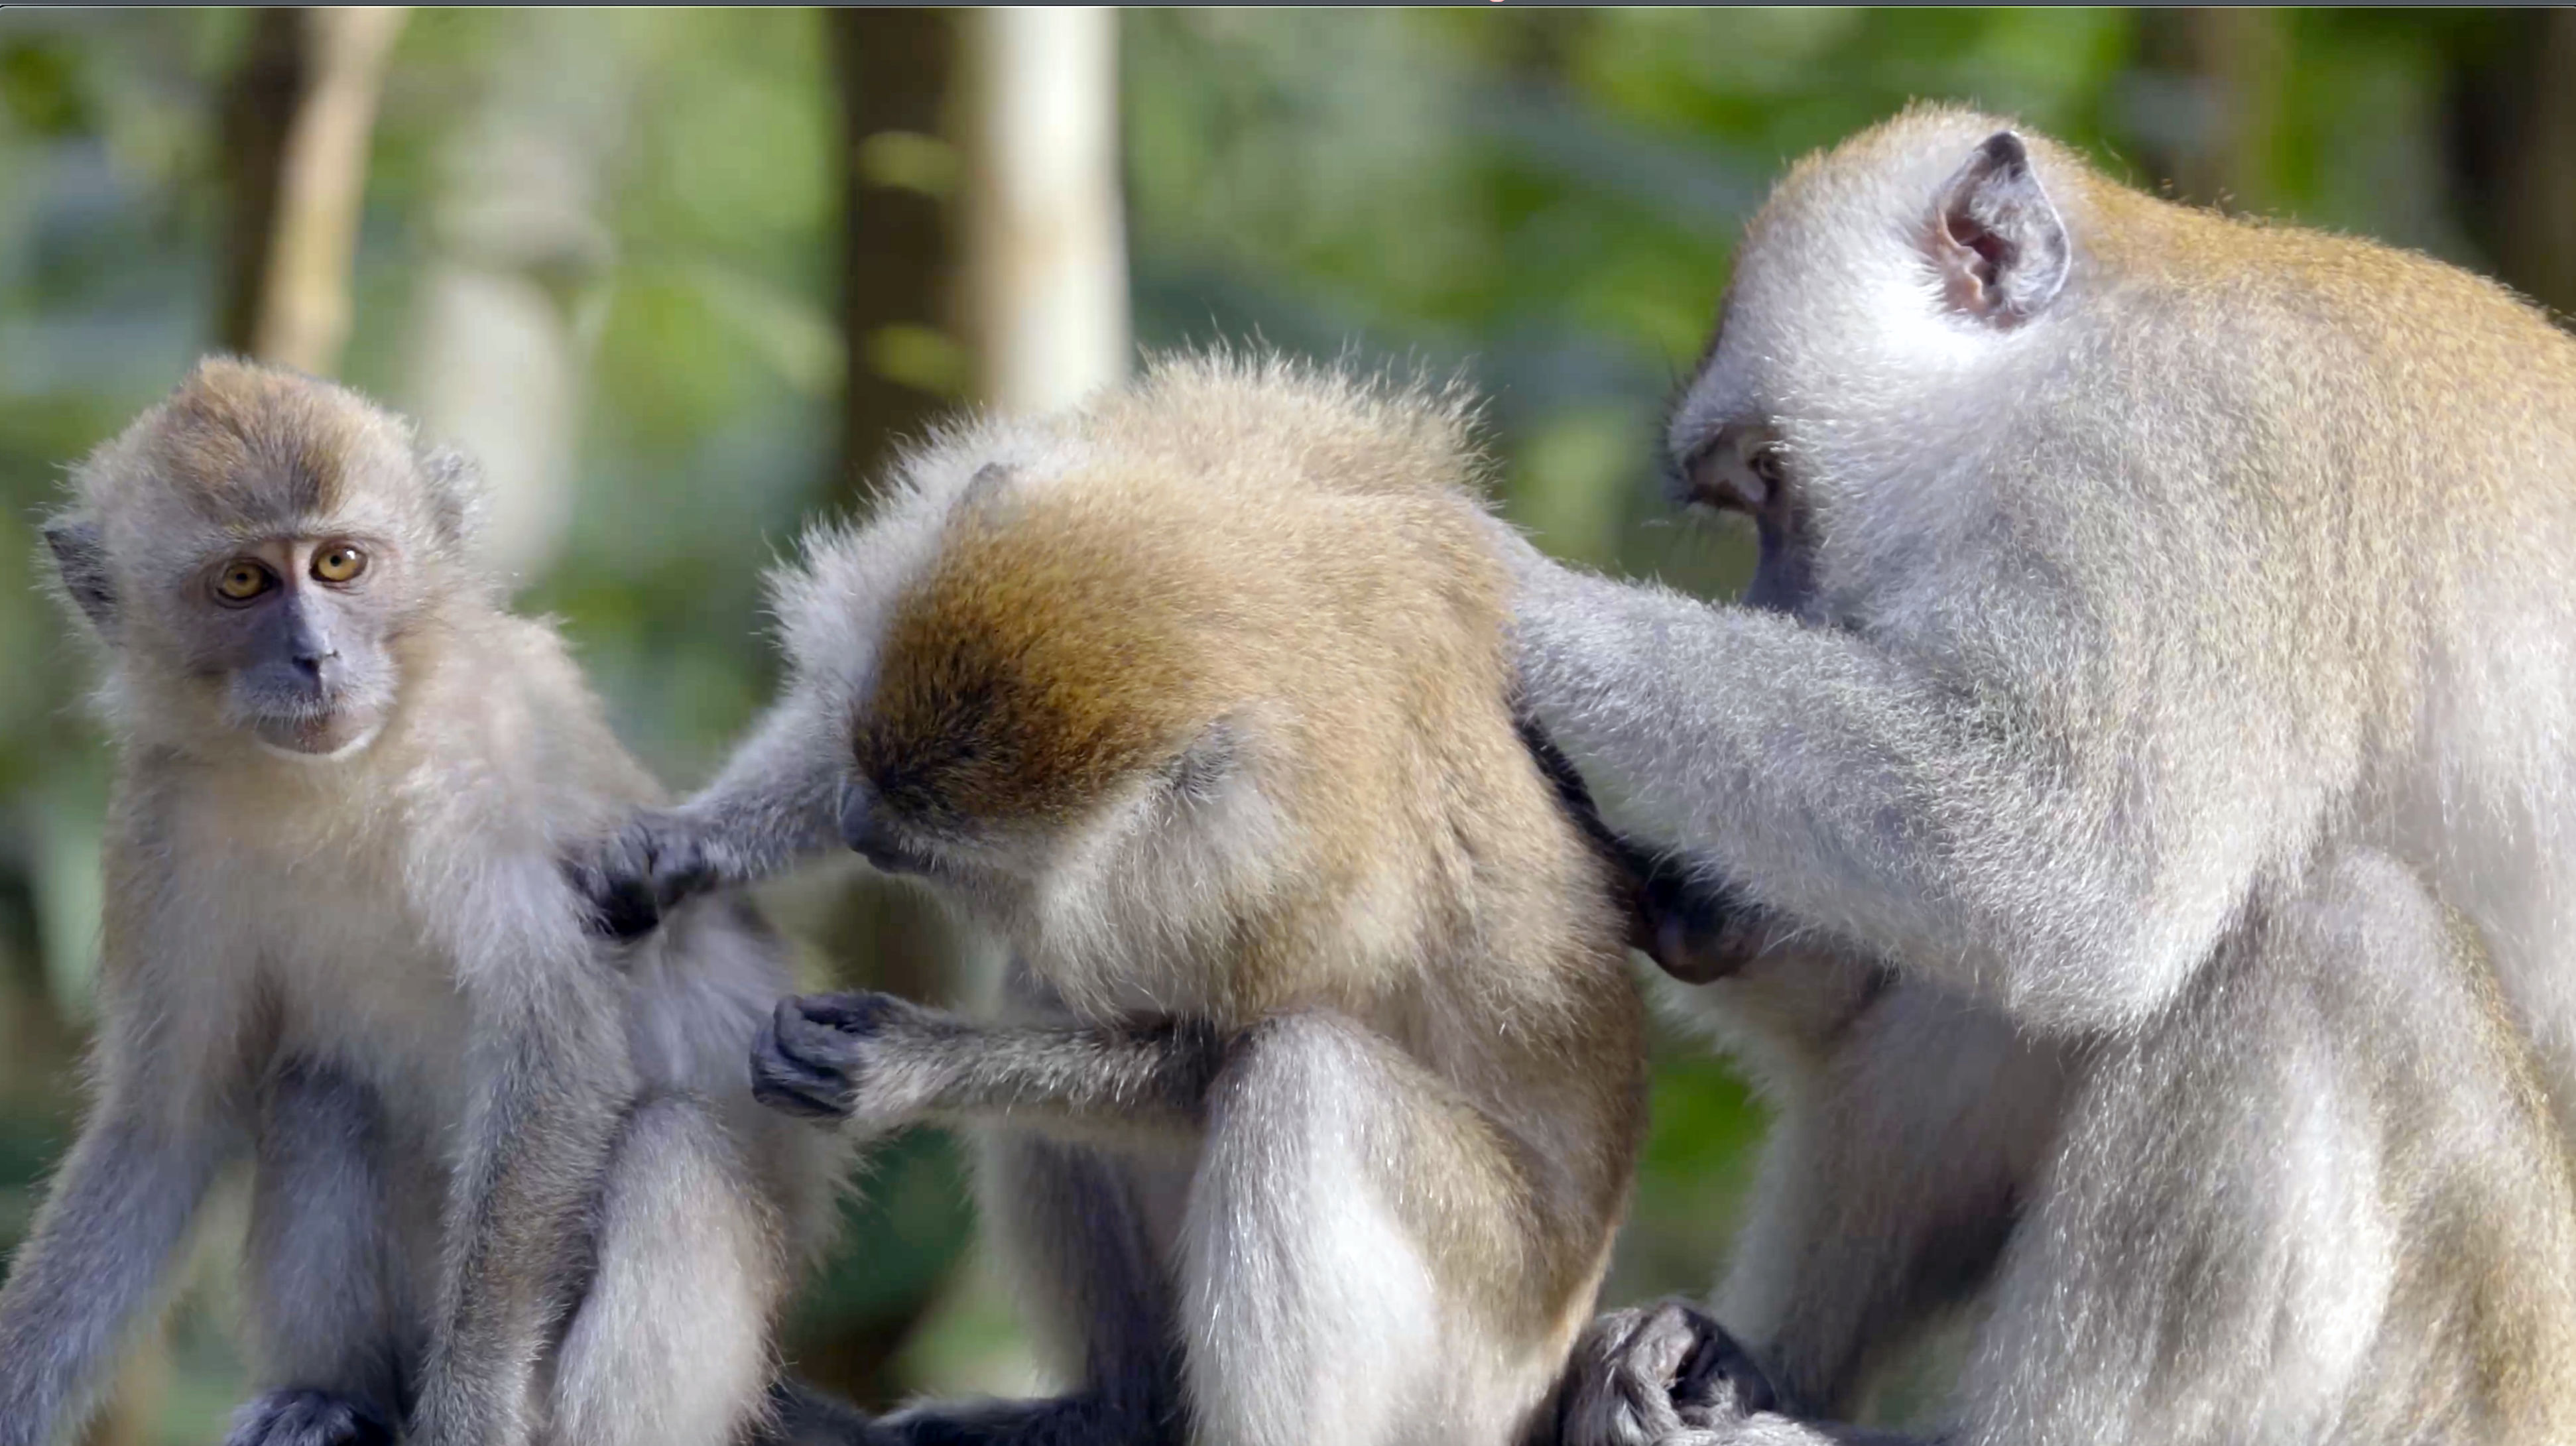 Human-Macaque Conflict Takes Two Hands to Clap